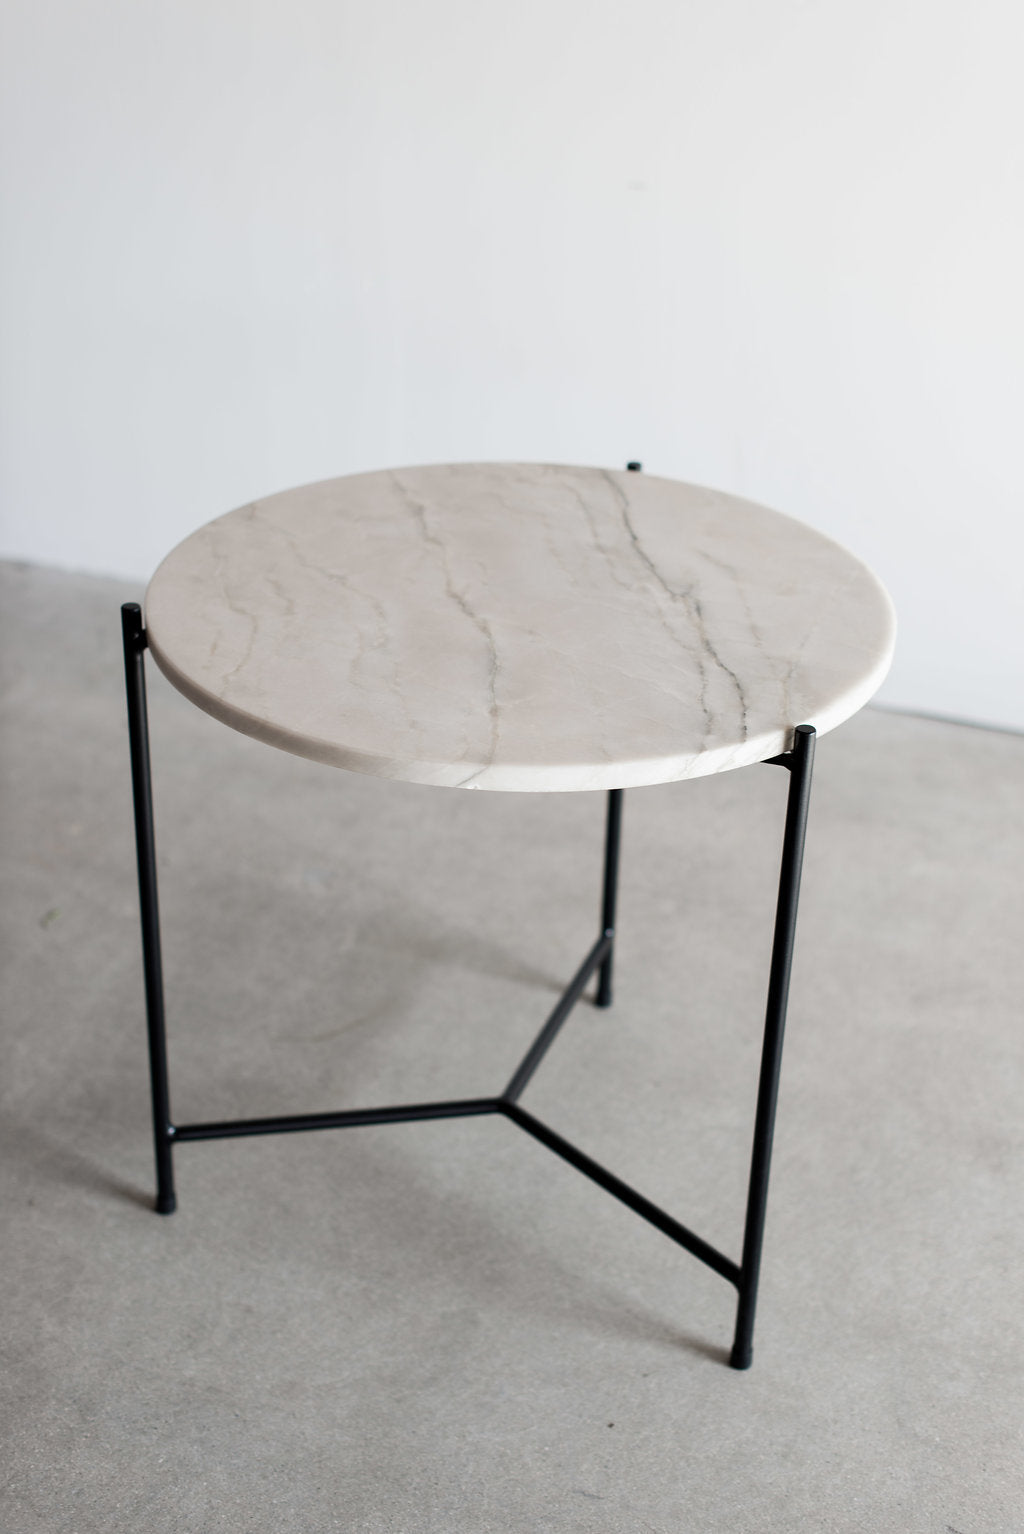 Sea pearl side table - steel legs with marble top